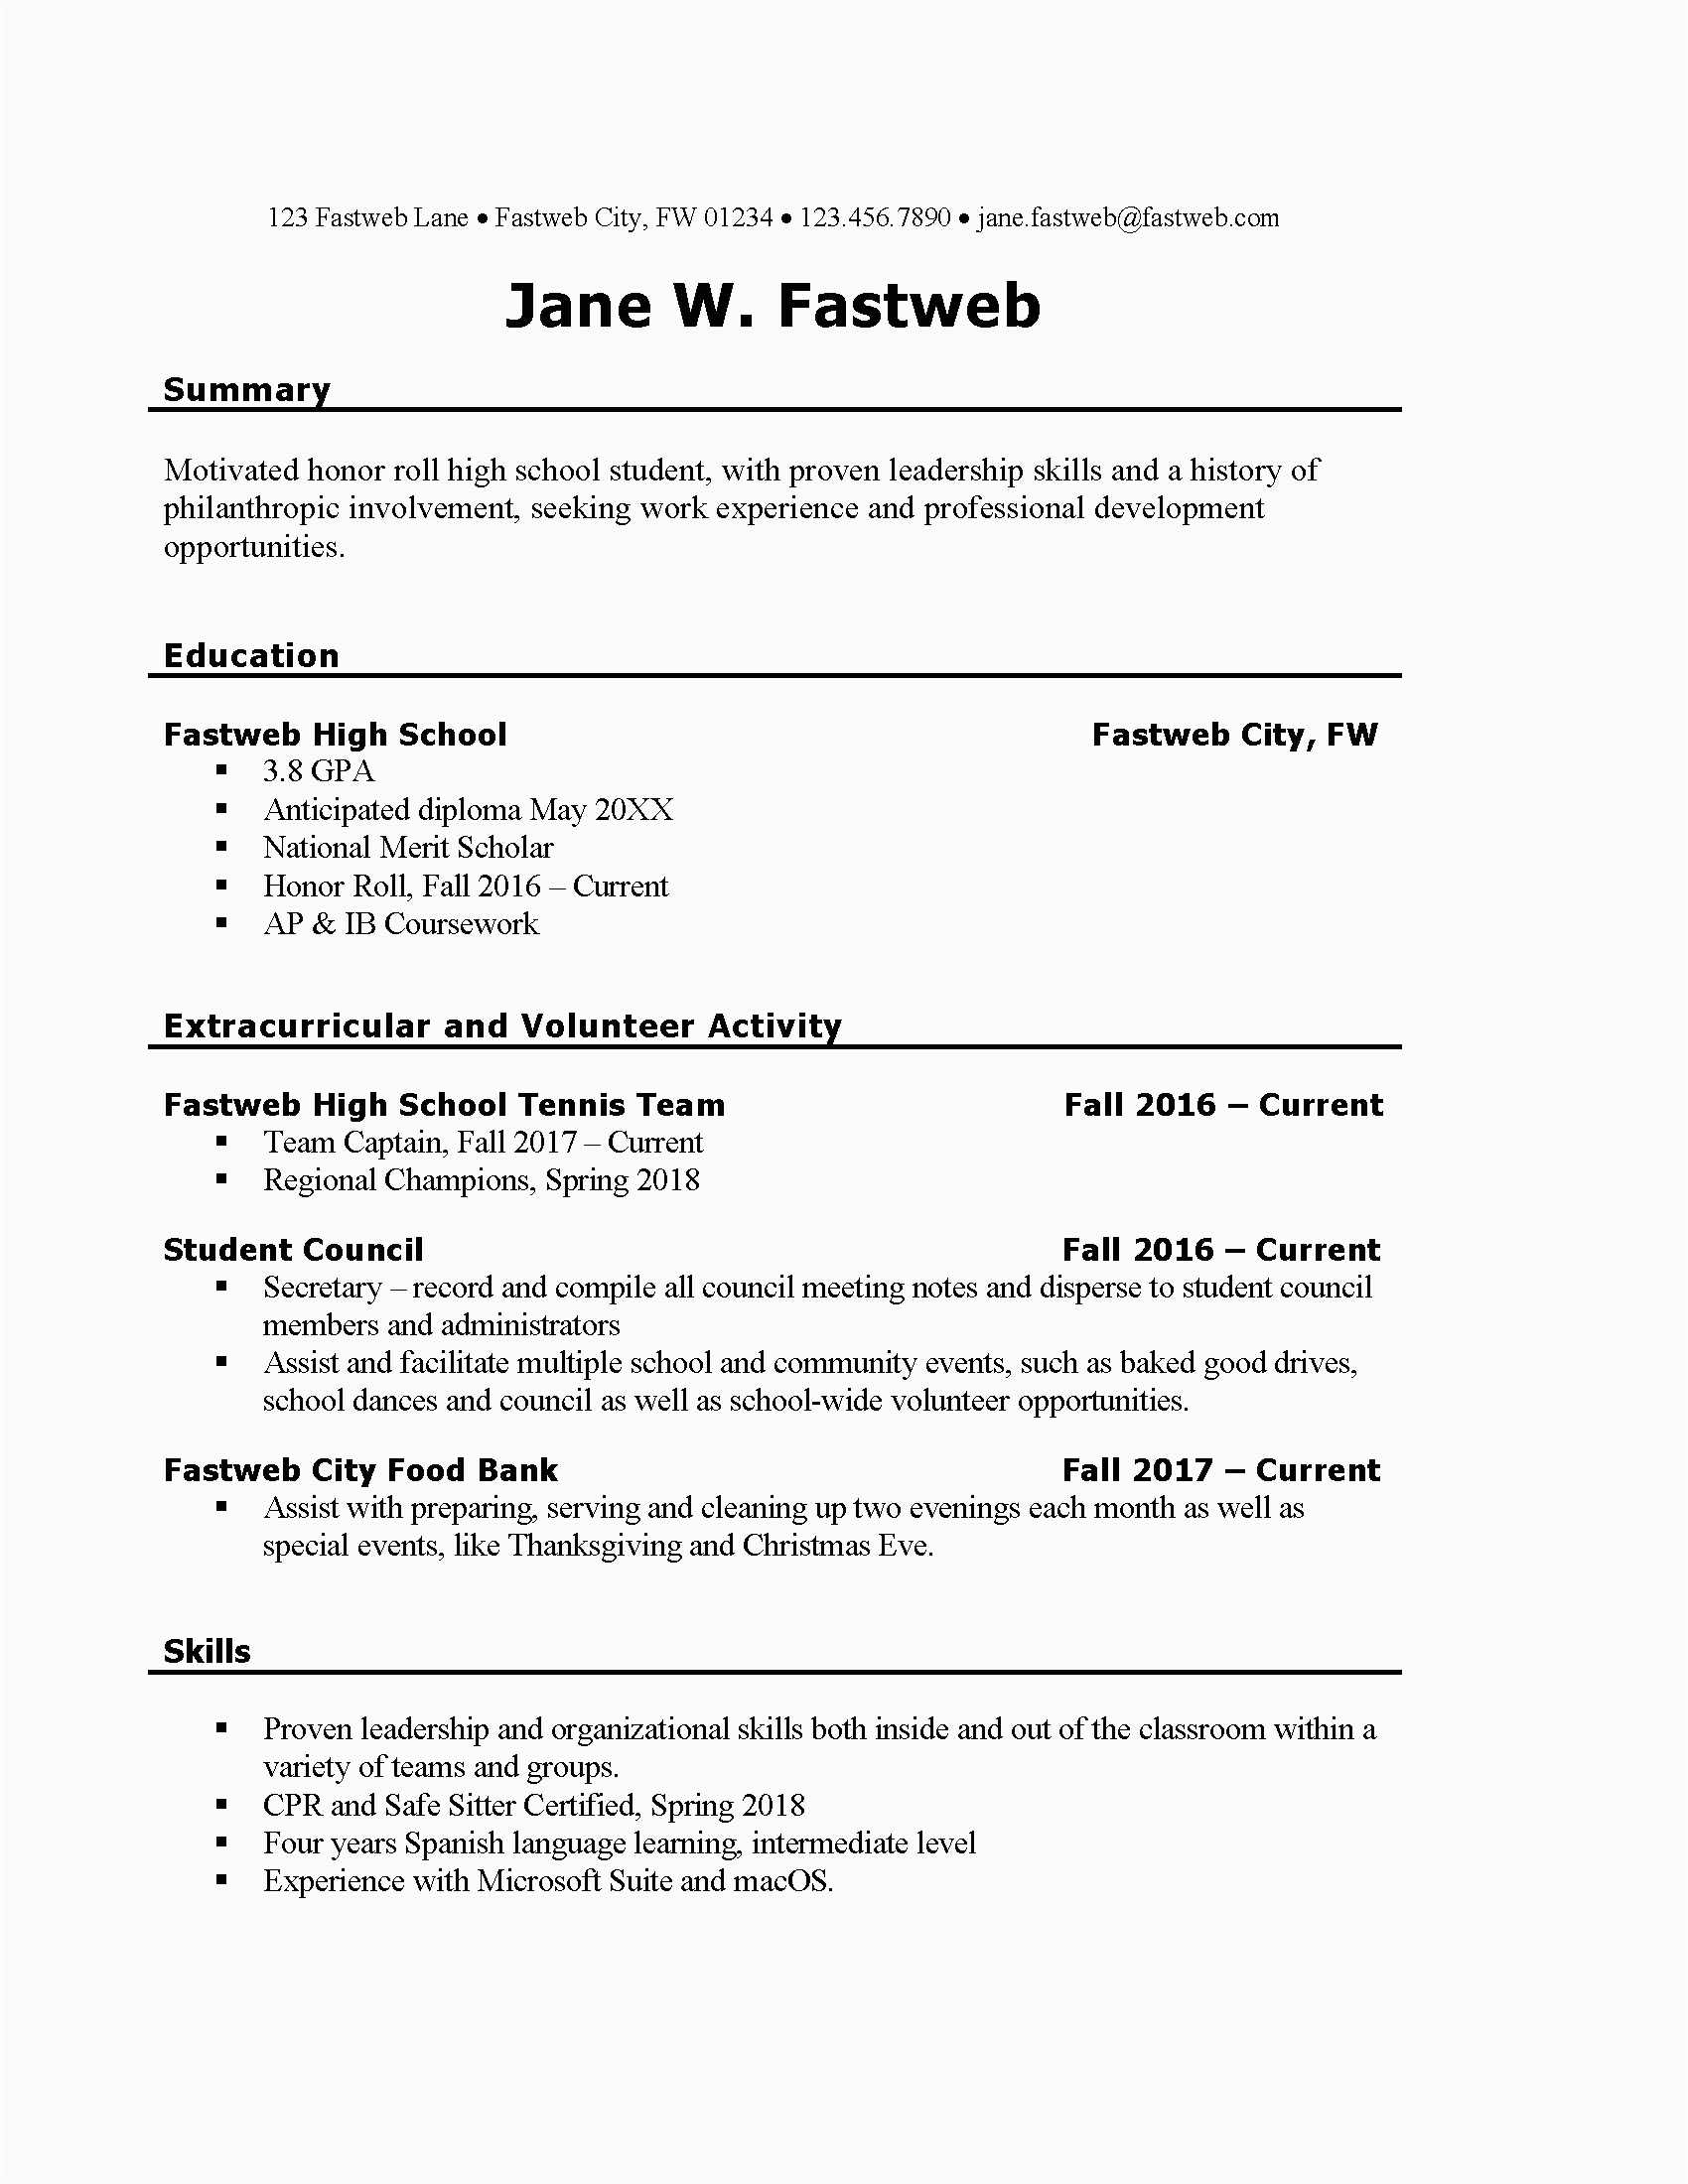 Resume for First Job No Experience Template Resume Examples for Teenager First Job